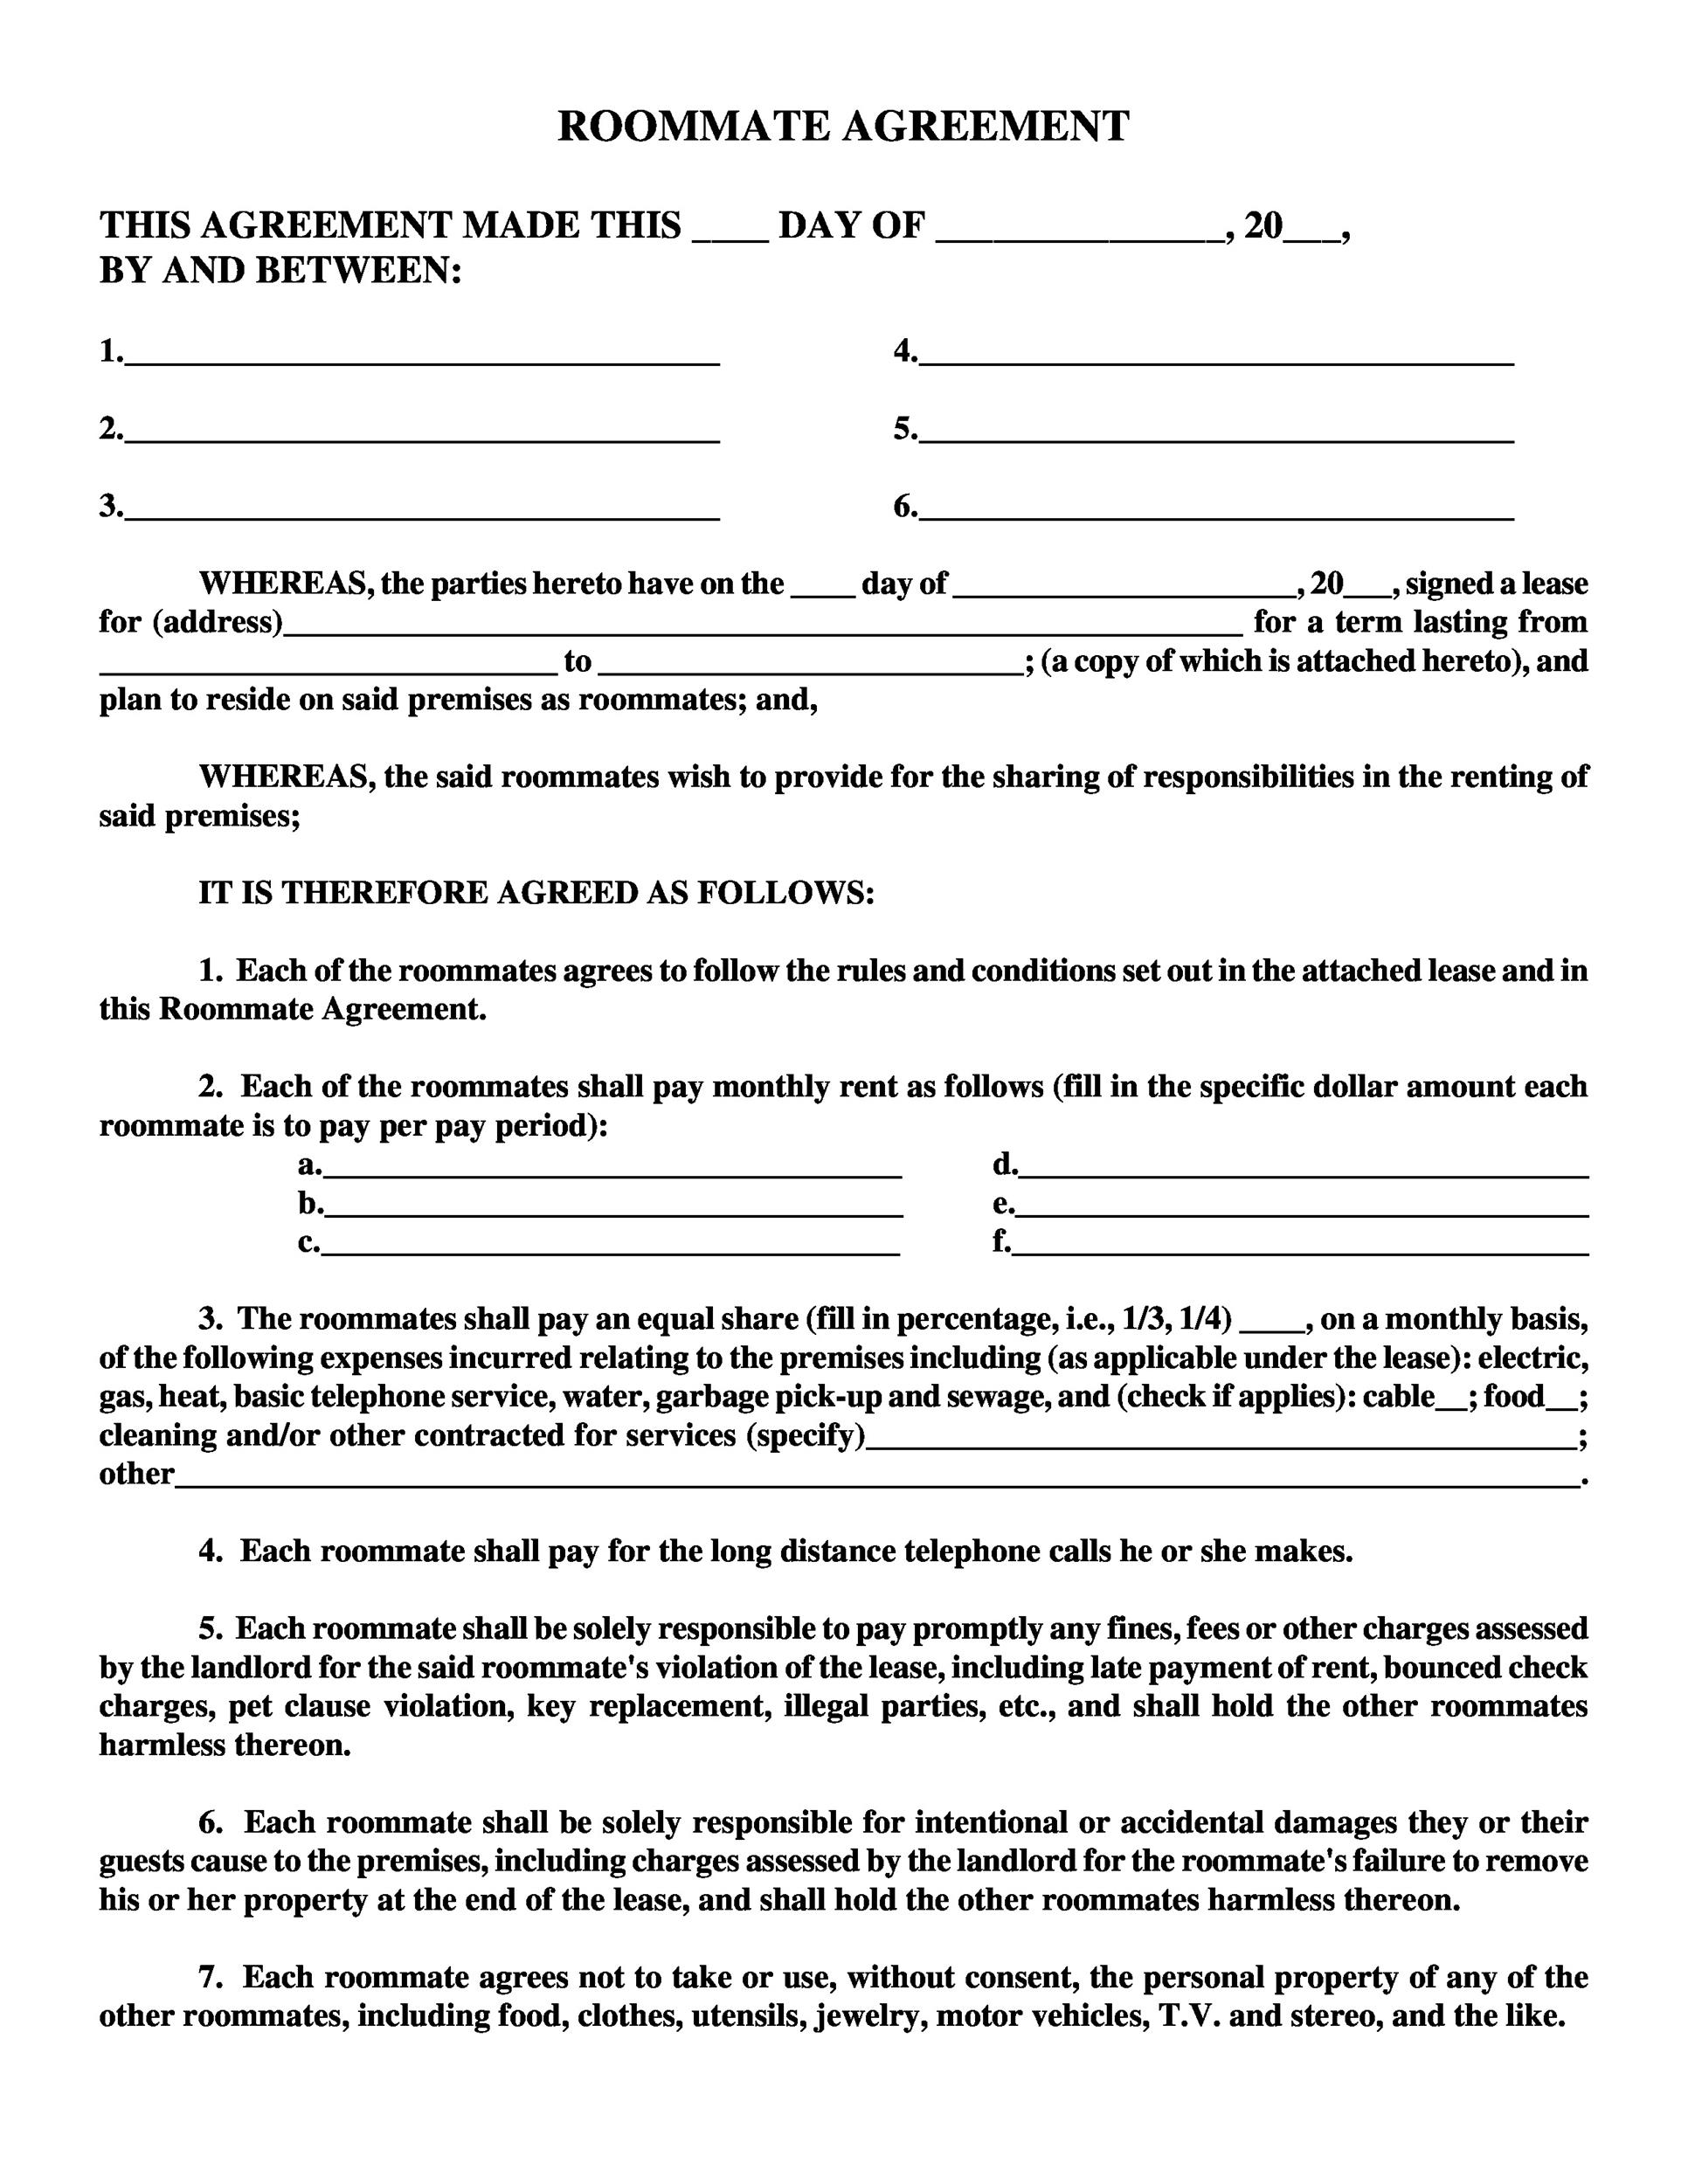 Roommate Agreement Template 20 